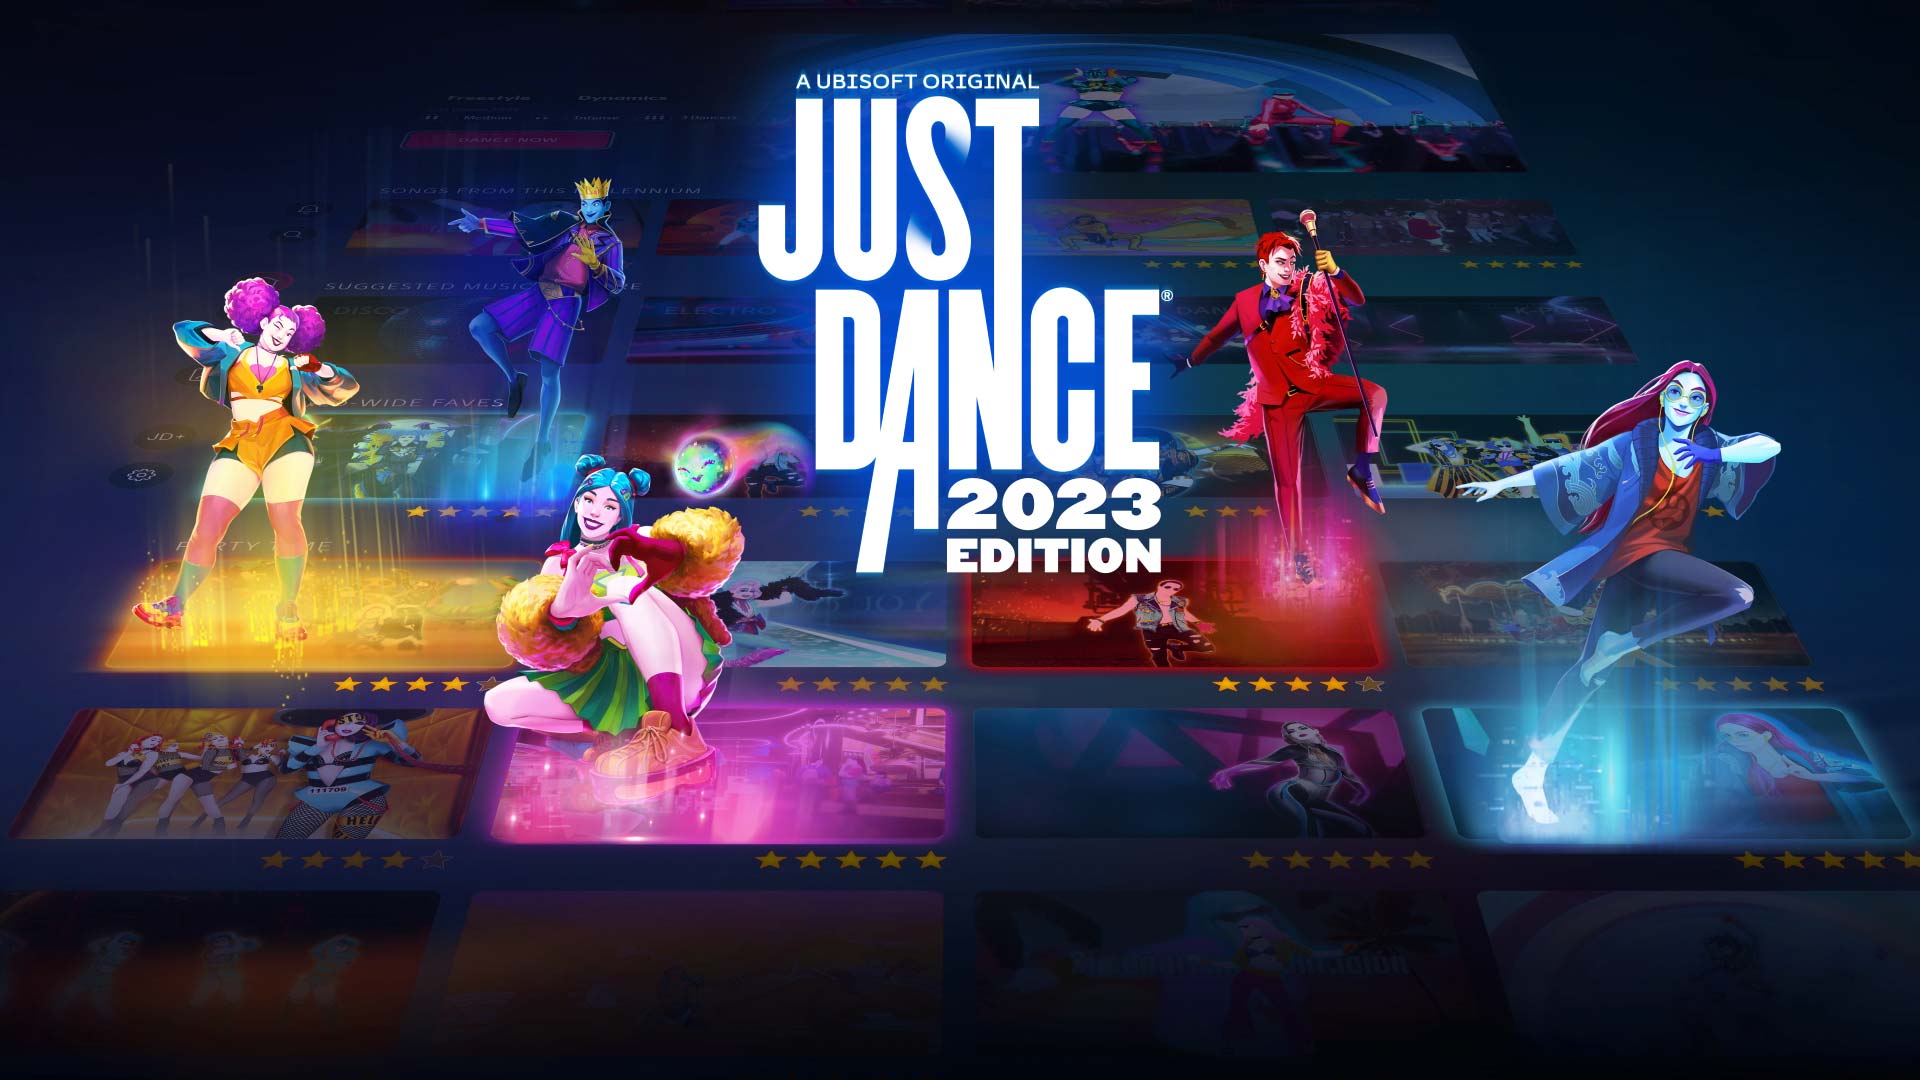 Dance Help 2023 Official Just Support Edition Ubisoft |